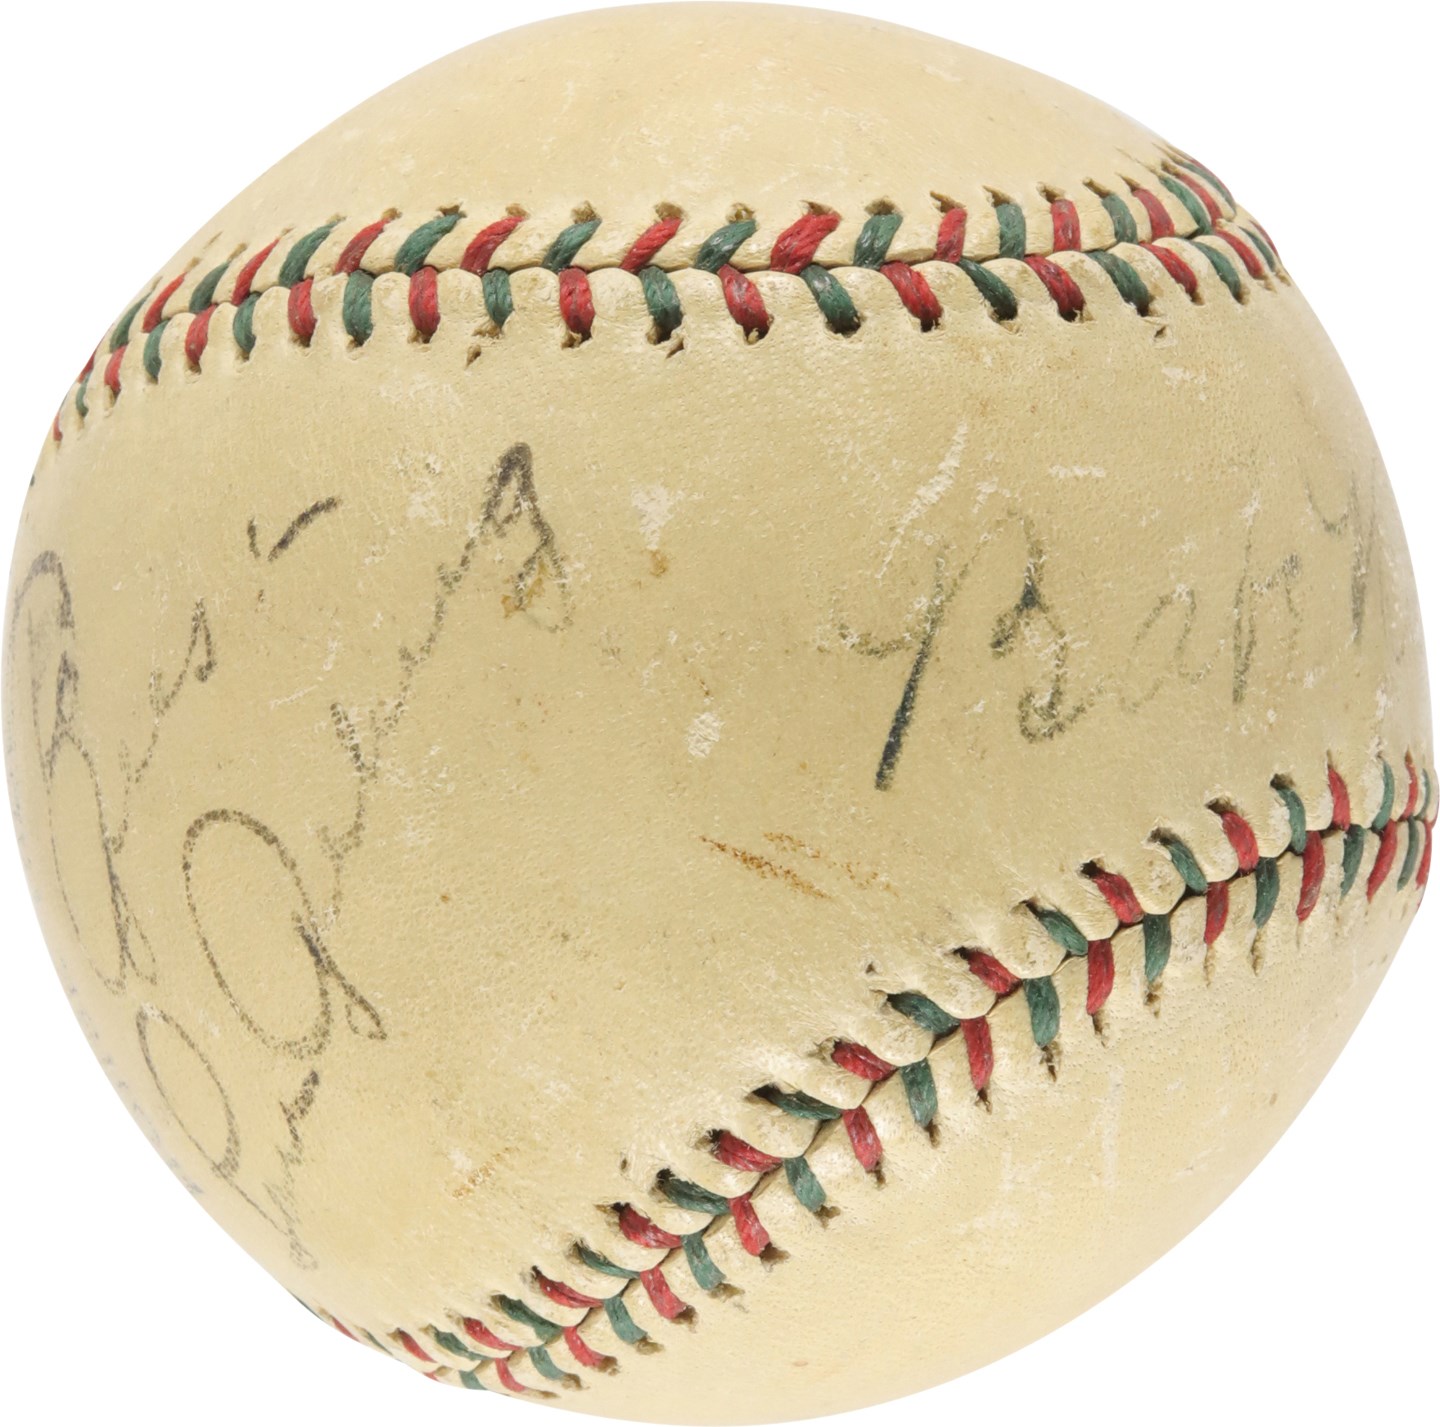 Ruth and Gehrig - 1920s Babe Ruth & Lou Gehrig Dual-Signed Baseball (PSA)